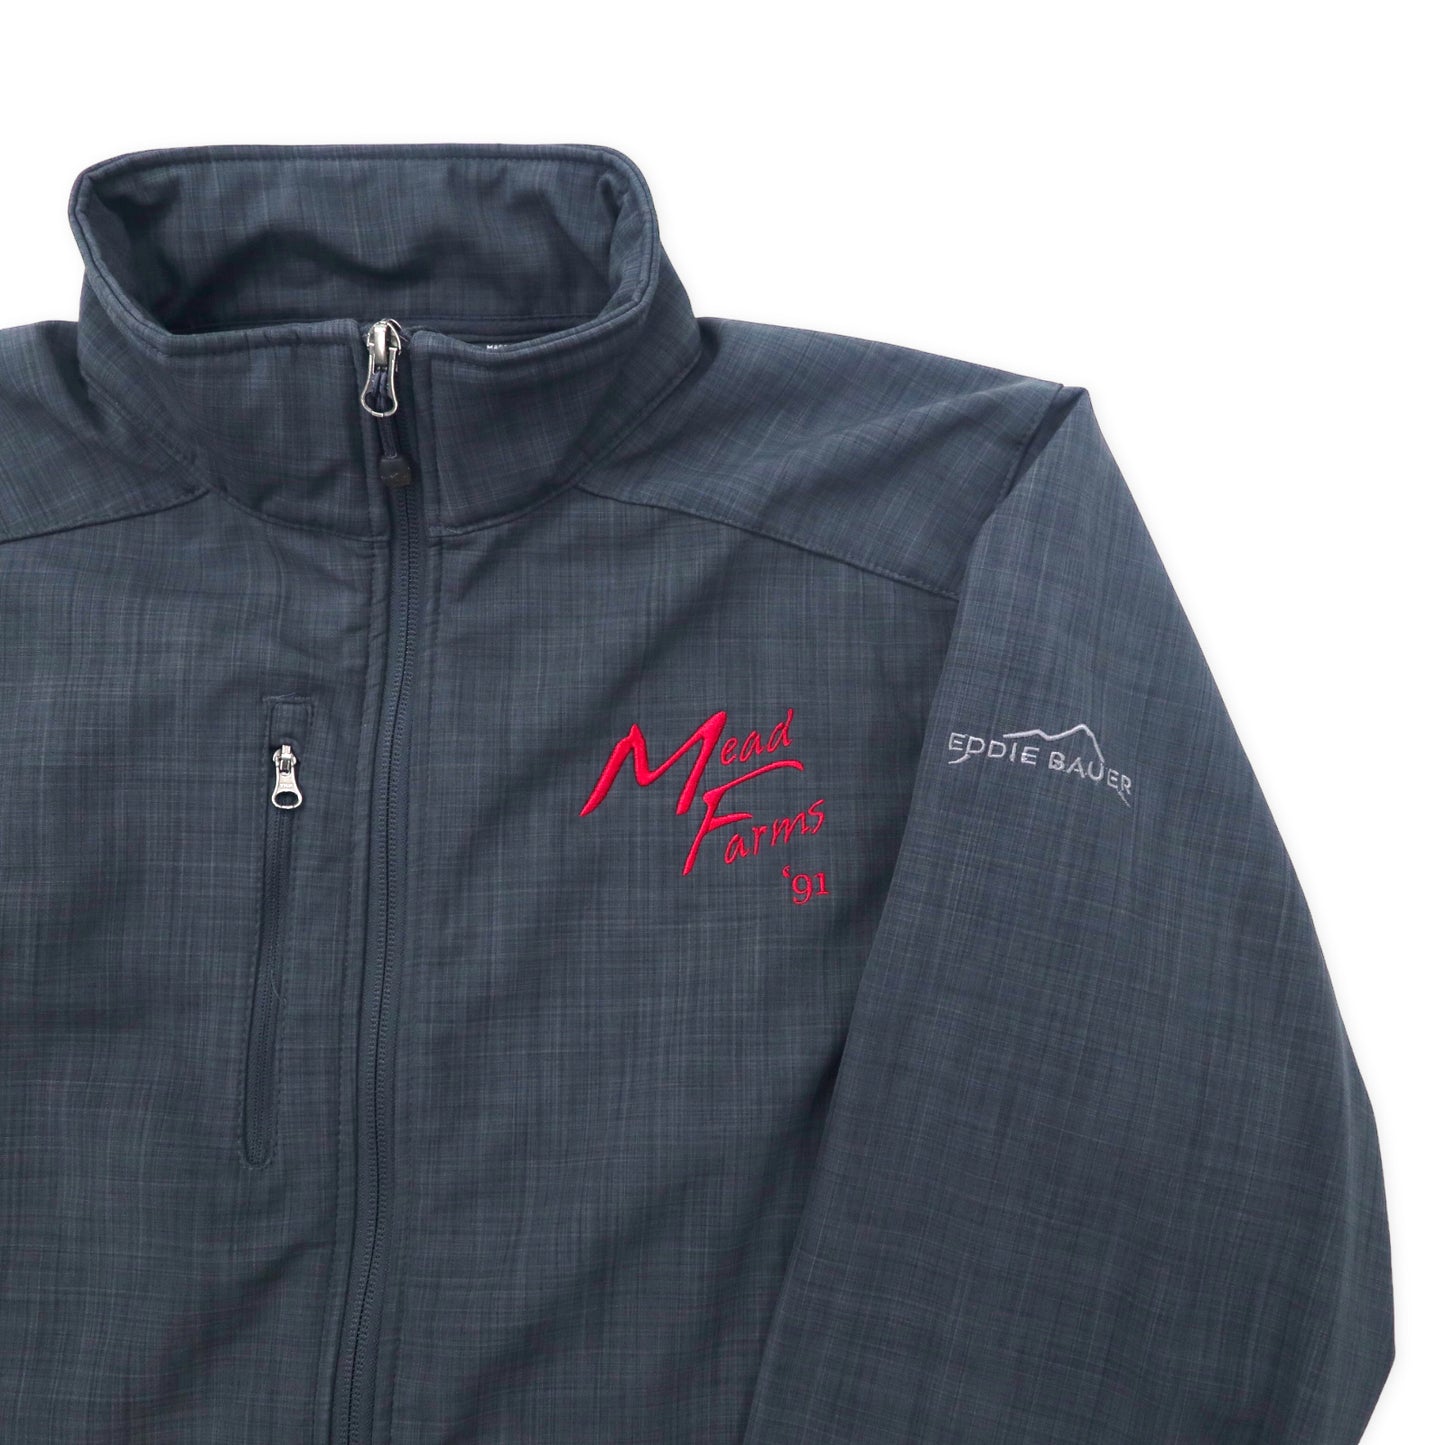 EDDIE BAUER FLEECE Lining Soft Shell Jacket M Gray Polyester US Company  MEAD FARMS 91 Embroidery